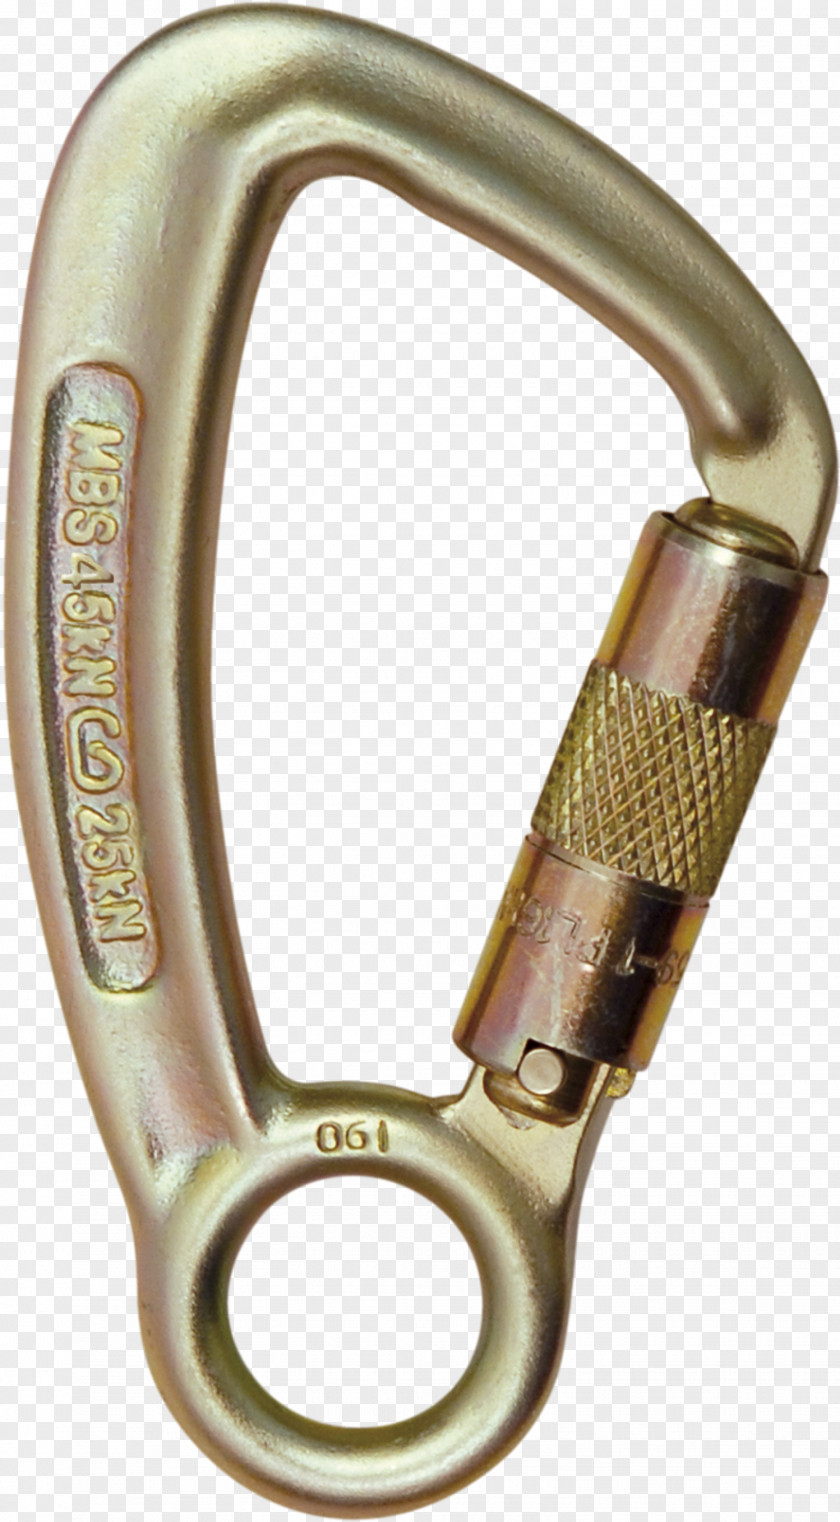 Carabiner Complete Fire And Rescue Aluminium Newton Lock PNG